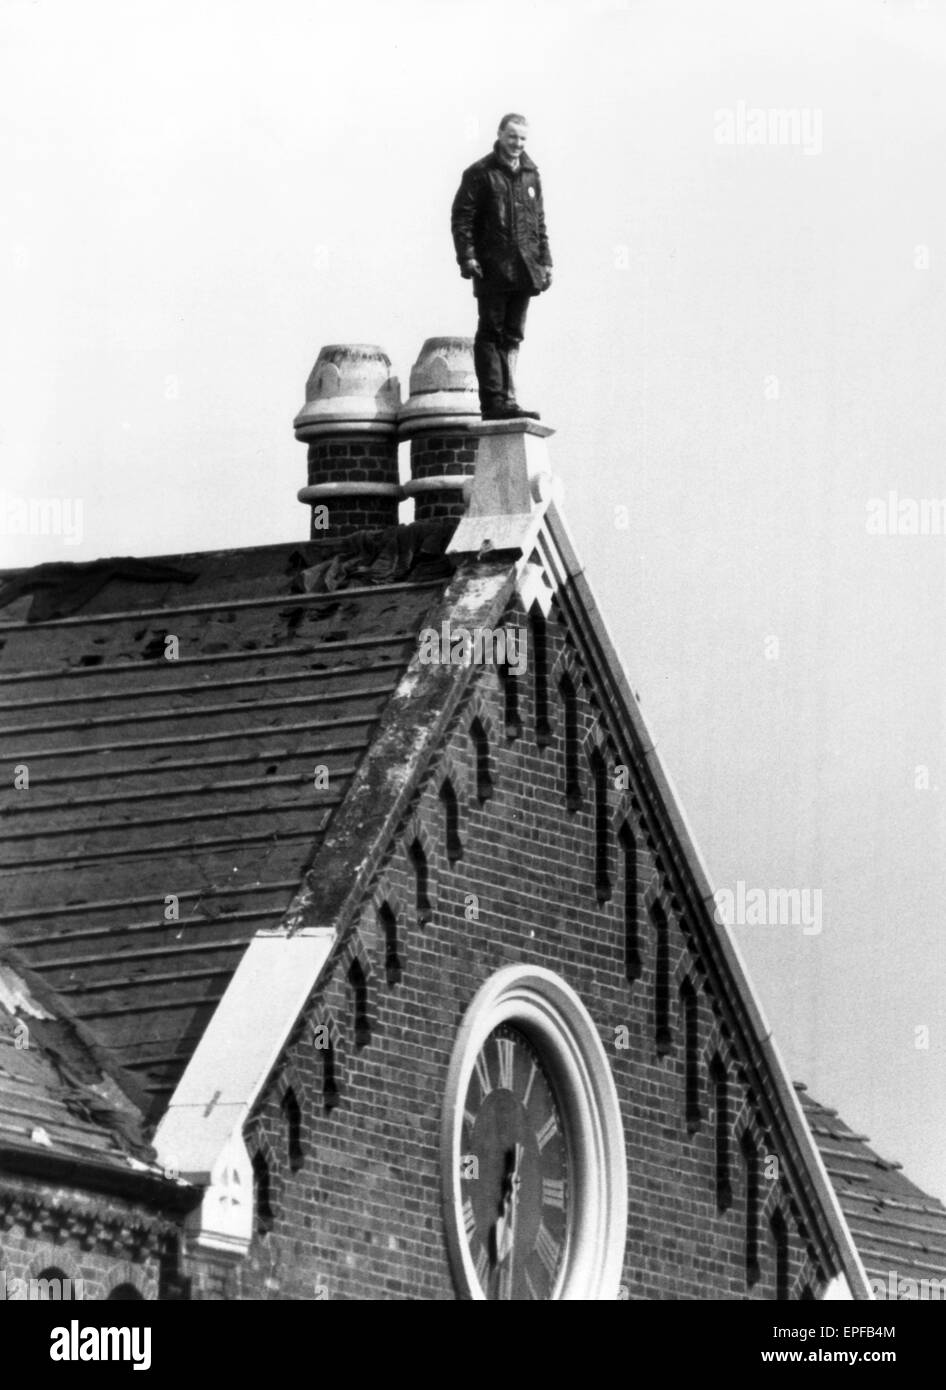 Strangeways Prison Riot April 1990. Man on rooftop.  A 25-day prison riot and rooftop protest at Strangeways Prison in Manchester, England. The riot began on the 1st April 1990 when prisoners took control of the prison chapel, and the riot quickly spread Stock Photo